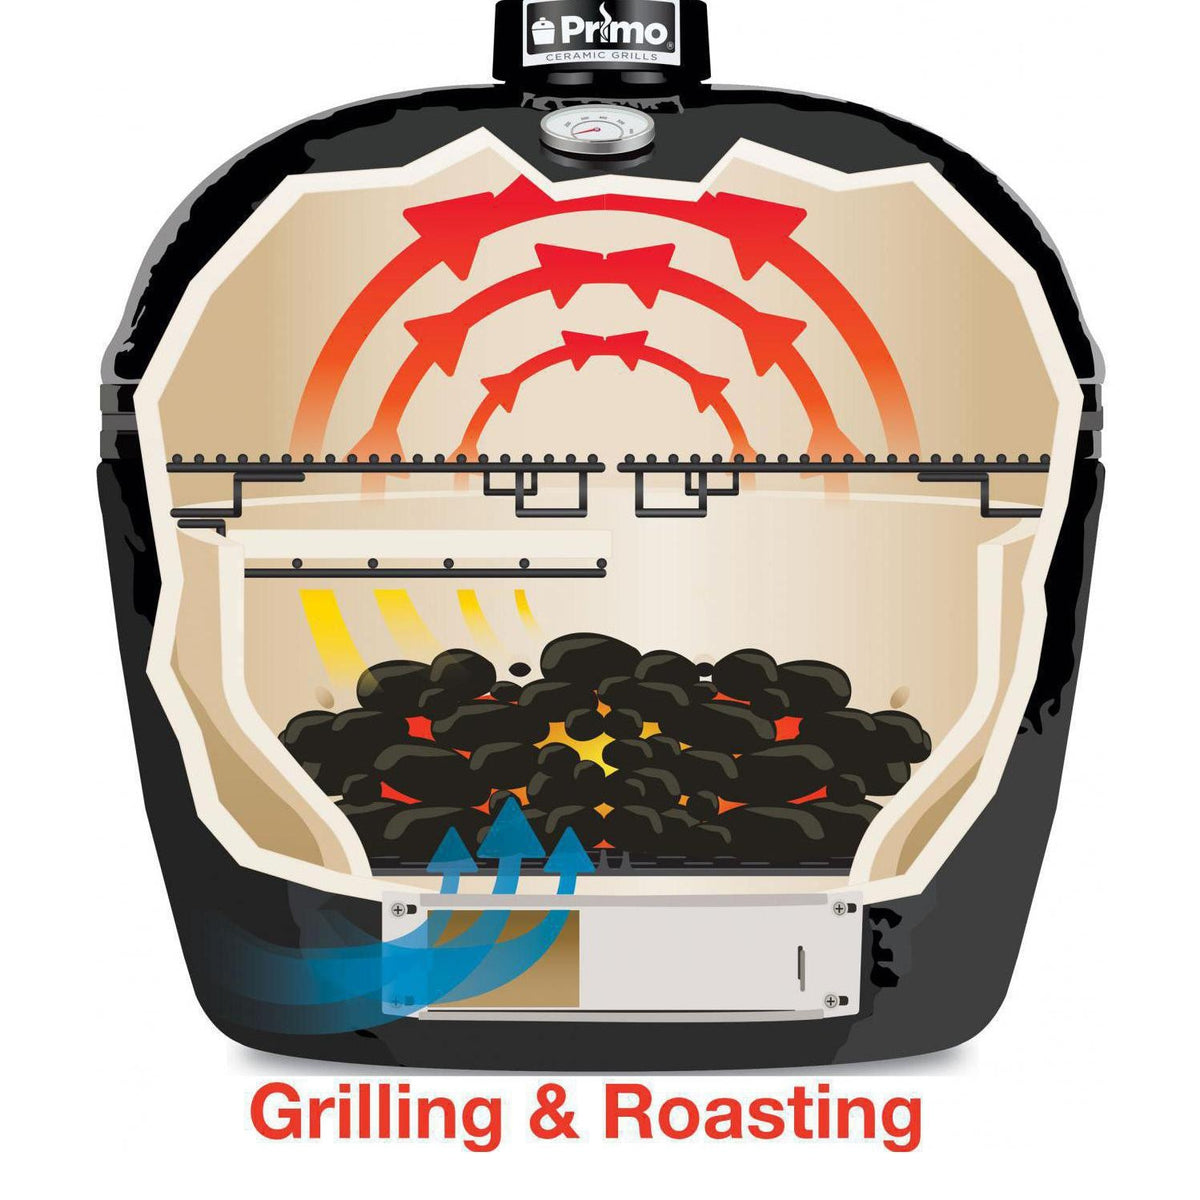 Primo All-In-One Oval Large 300 Ceramic Kamado Grill With Cradle, Side Shelves, And Stainless Steel Grates